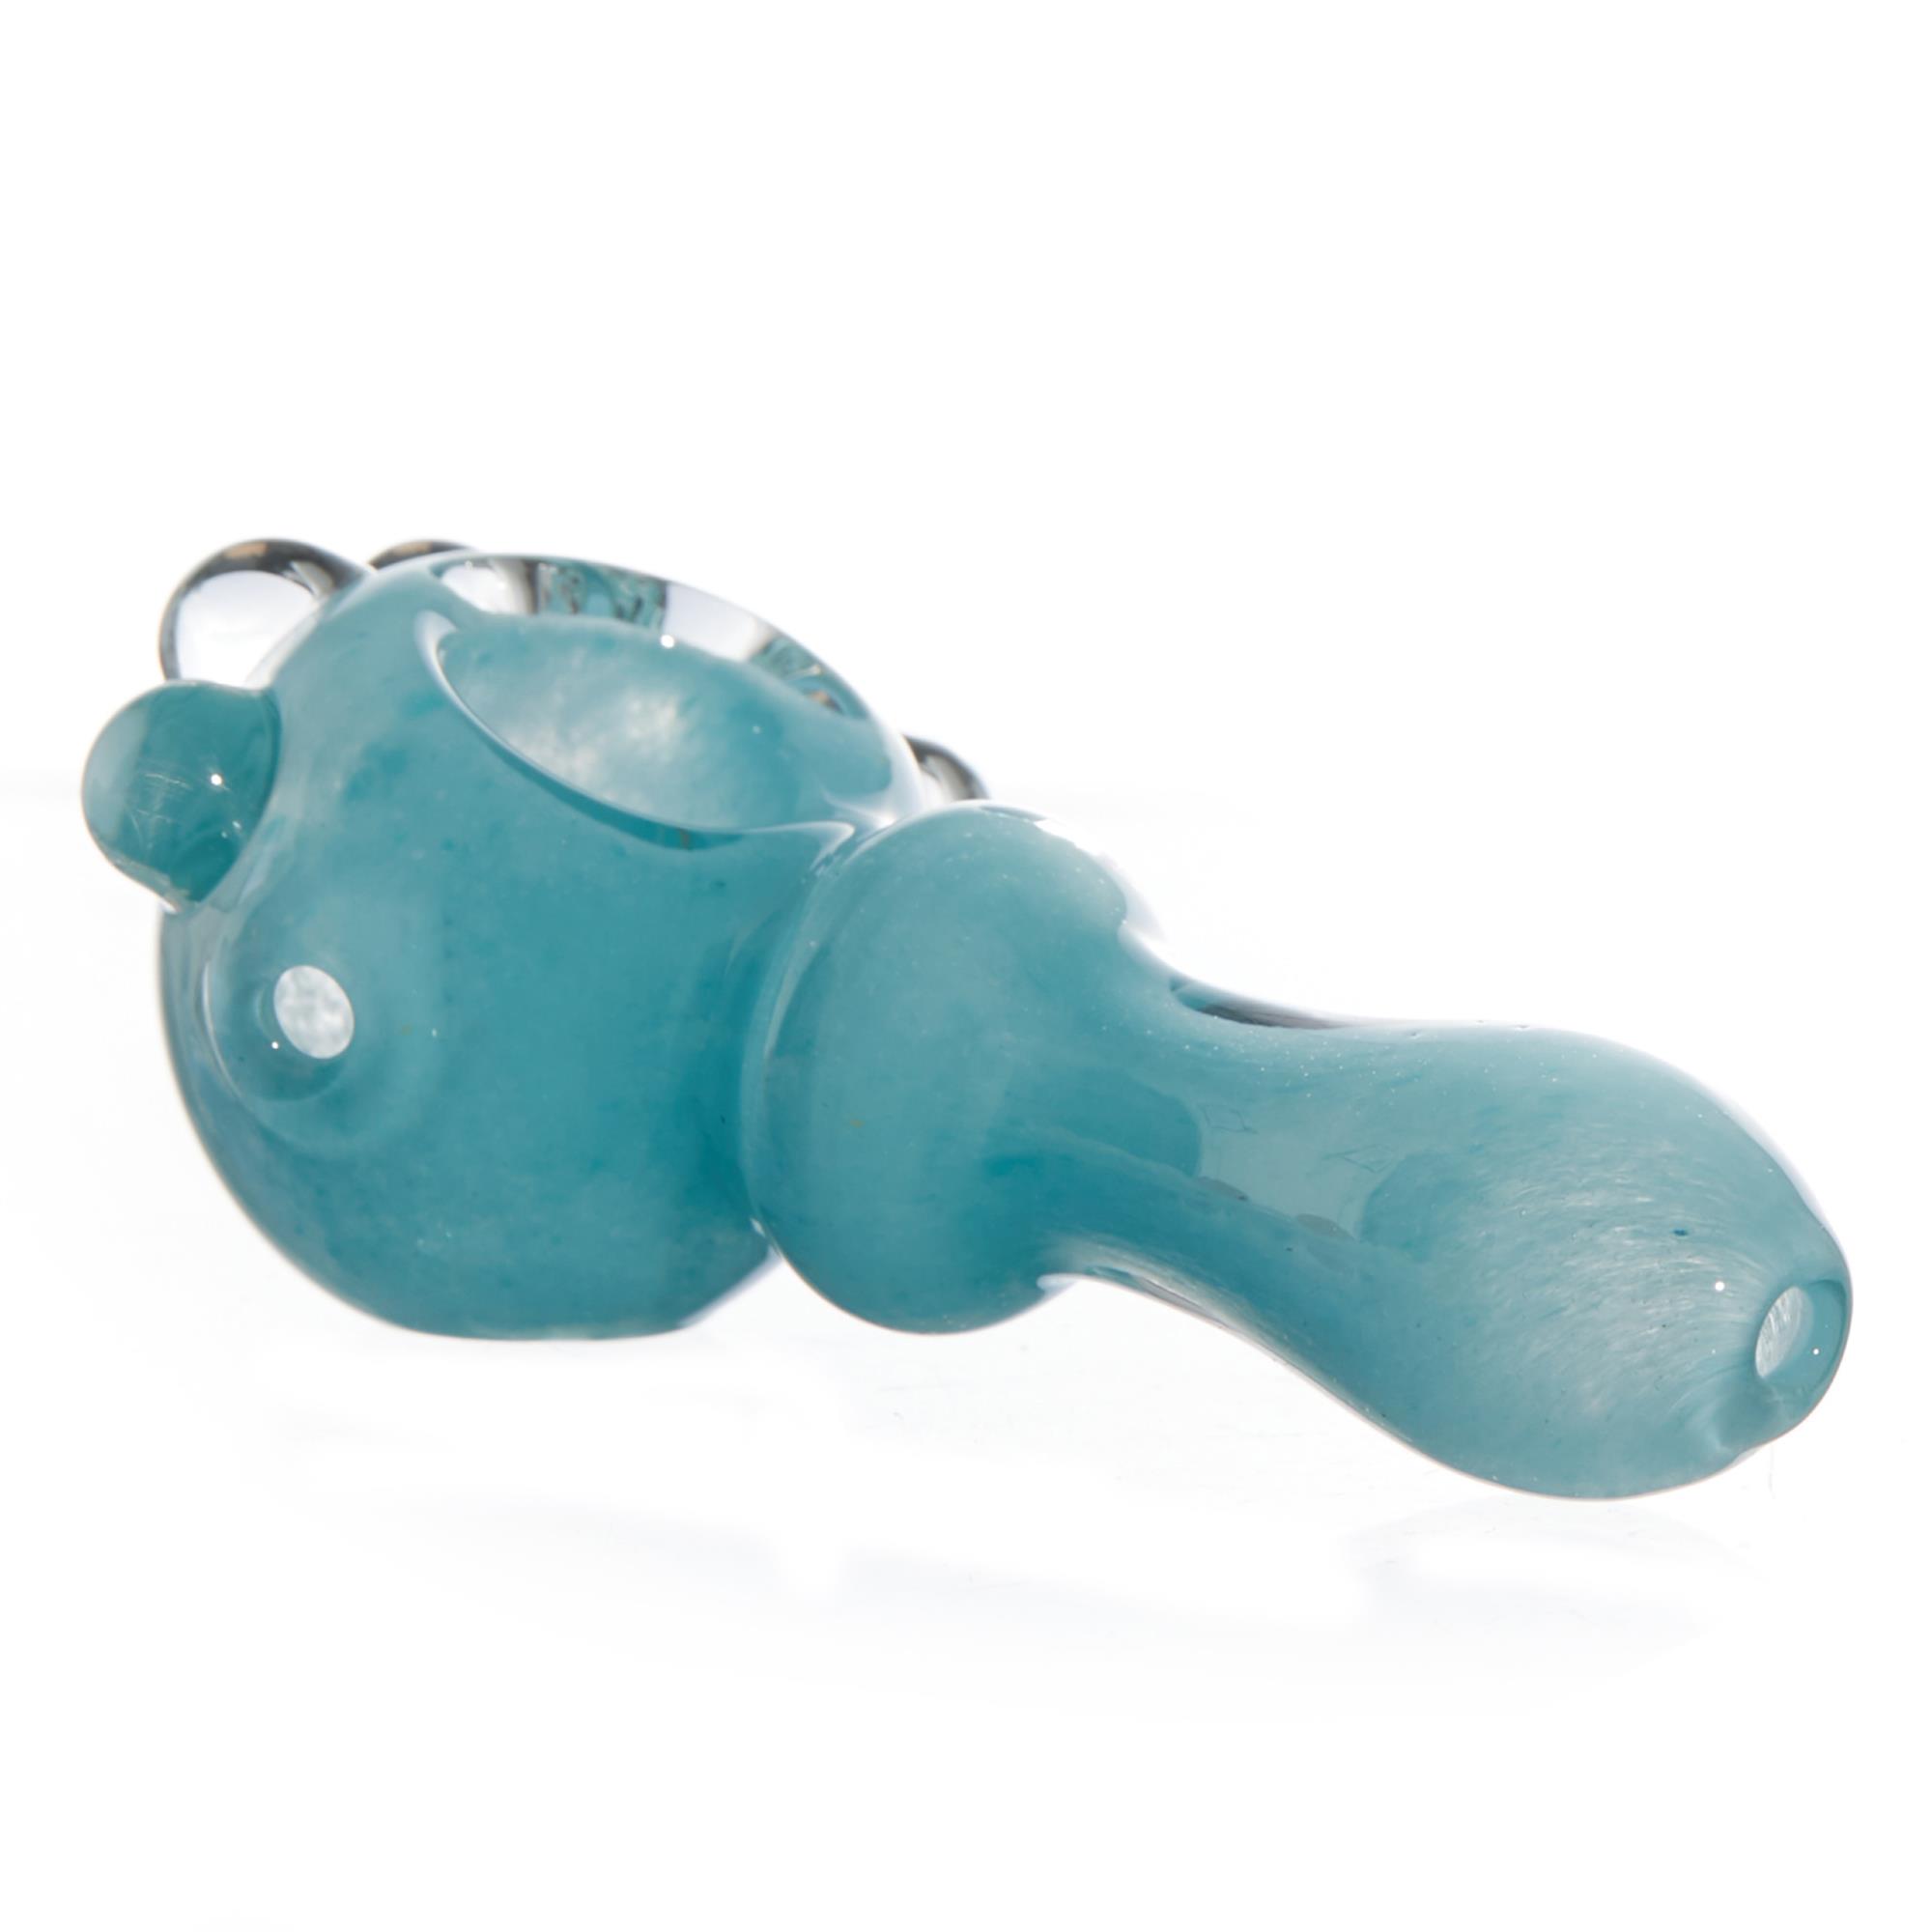 CAT ALLEY SPOON PIPE